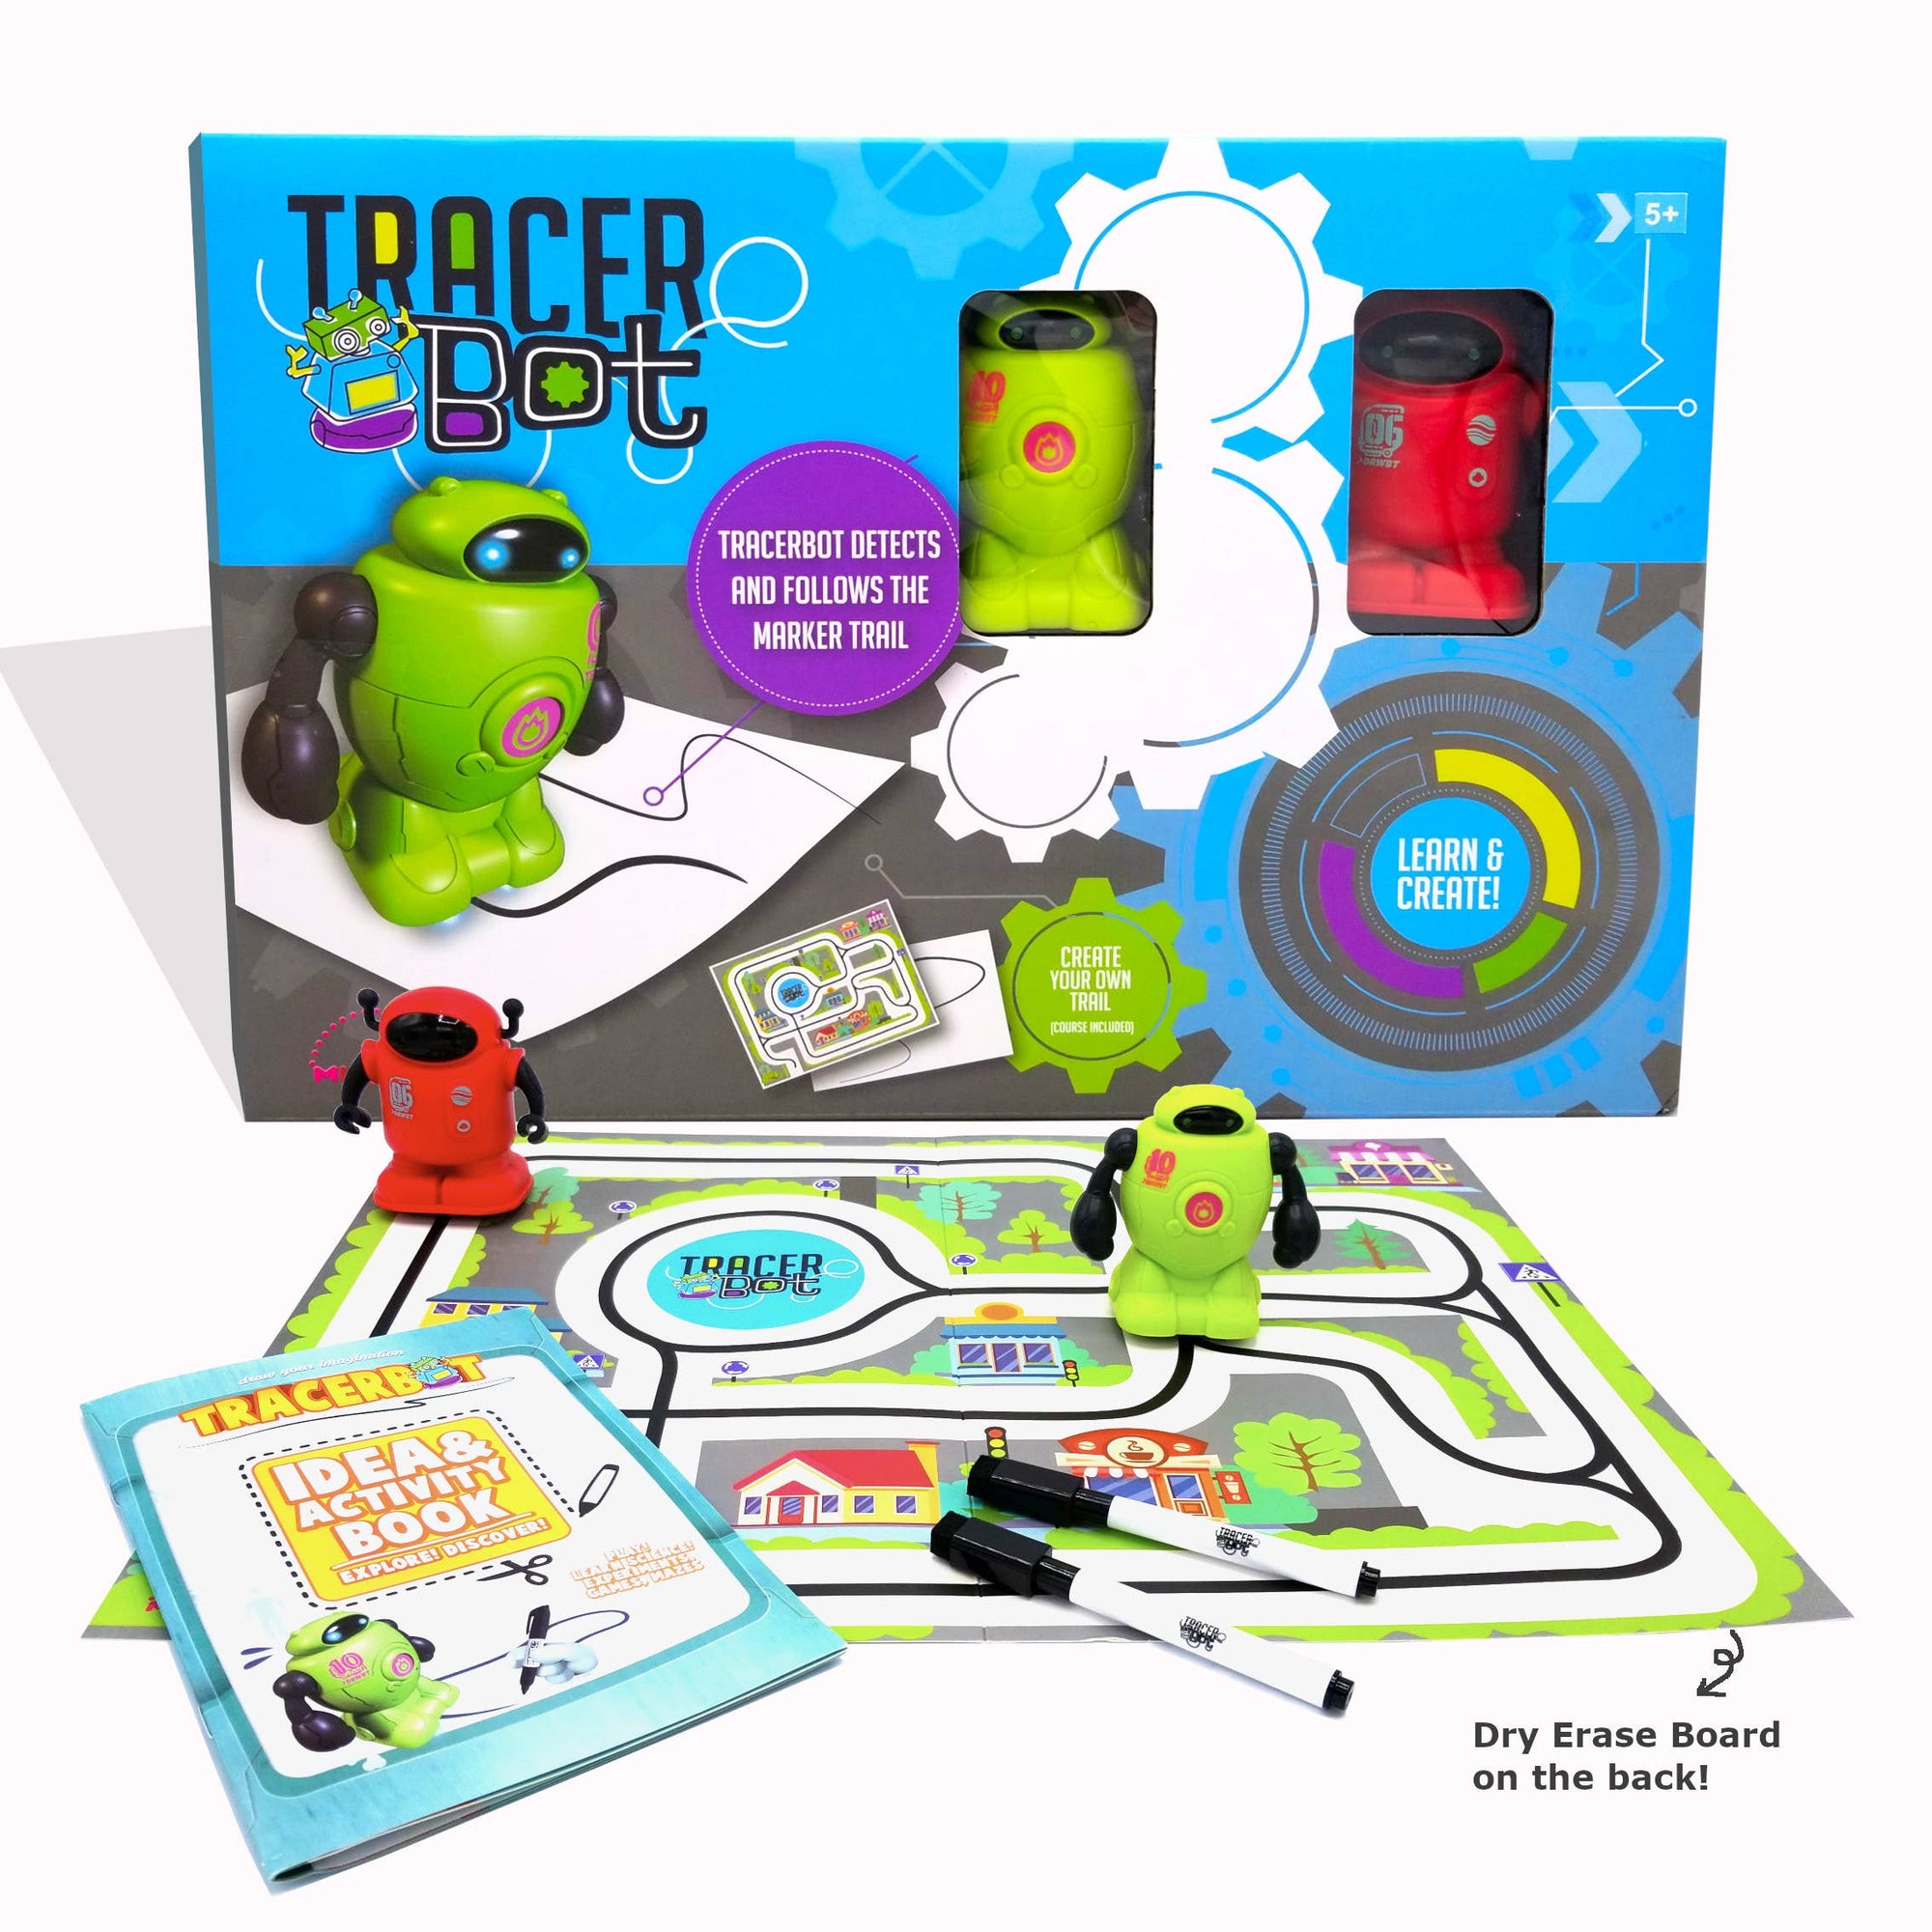  Thames & Kosmos Andy: The Code & Play Robot, Screen-Free  Coding & Robotics Kit for Ages 4+, Pre-Built Robot w/Intuitive Buttons for  Preschoolers to Start Programming!